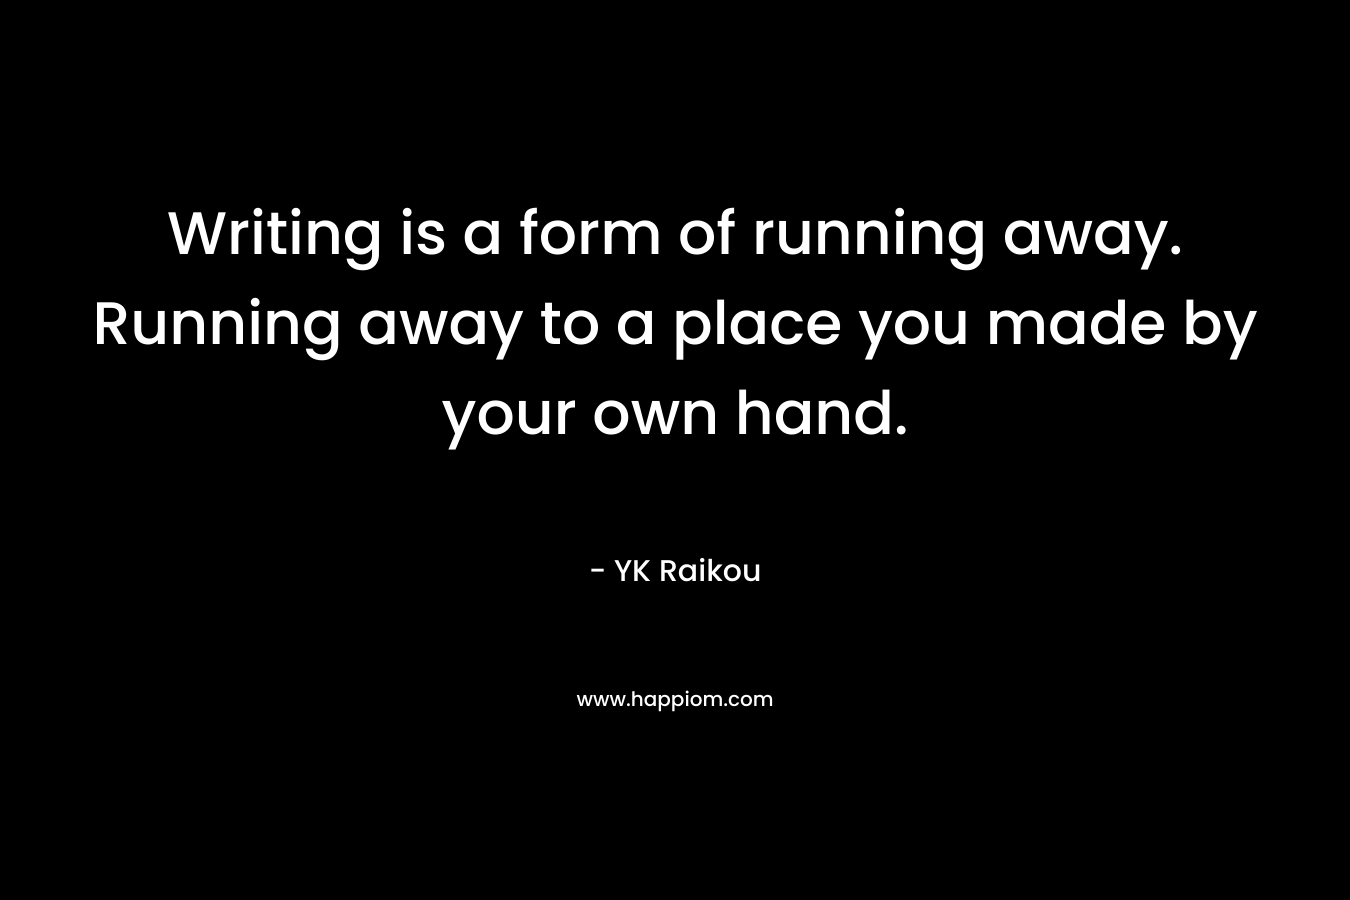 Writing is a form of running away. Running away to a place you made by your own hand.